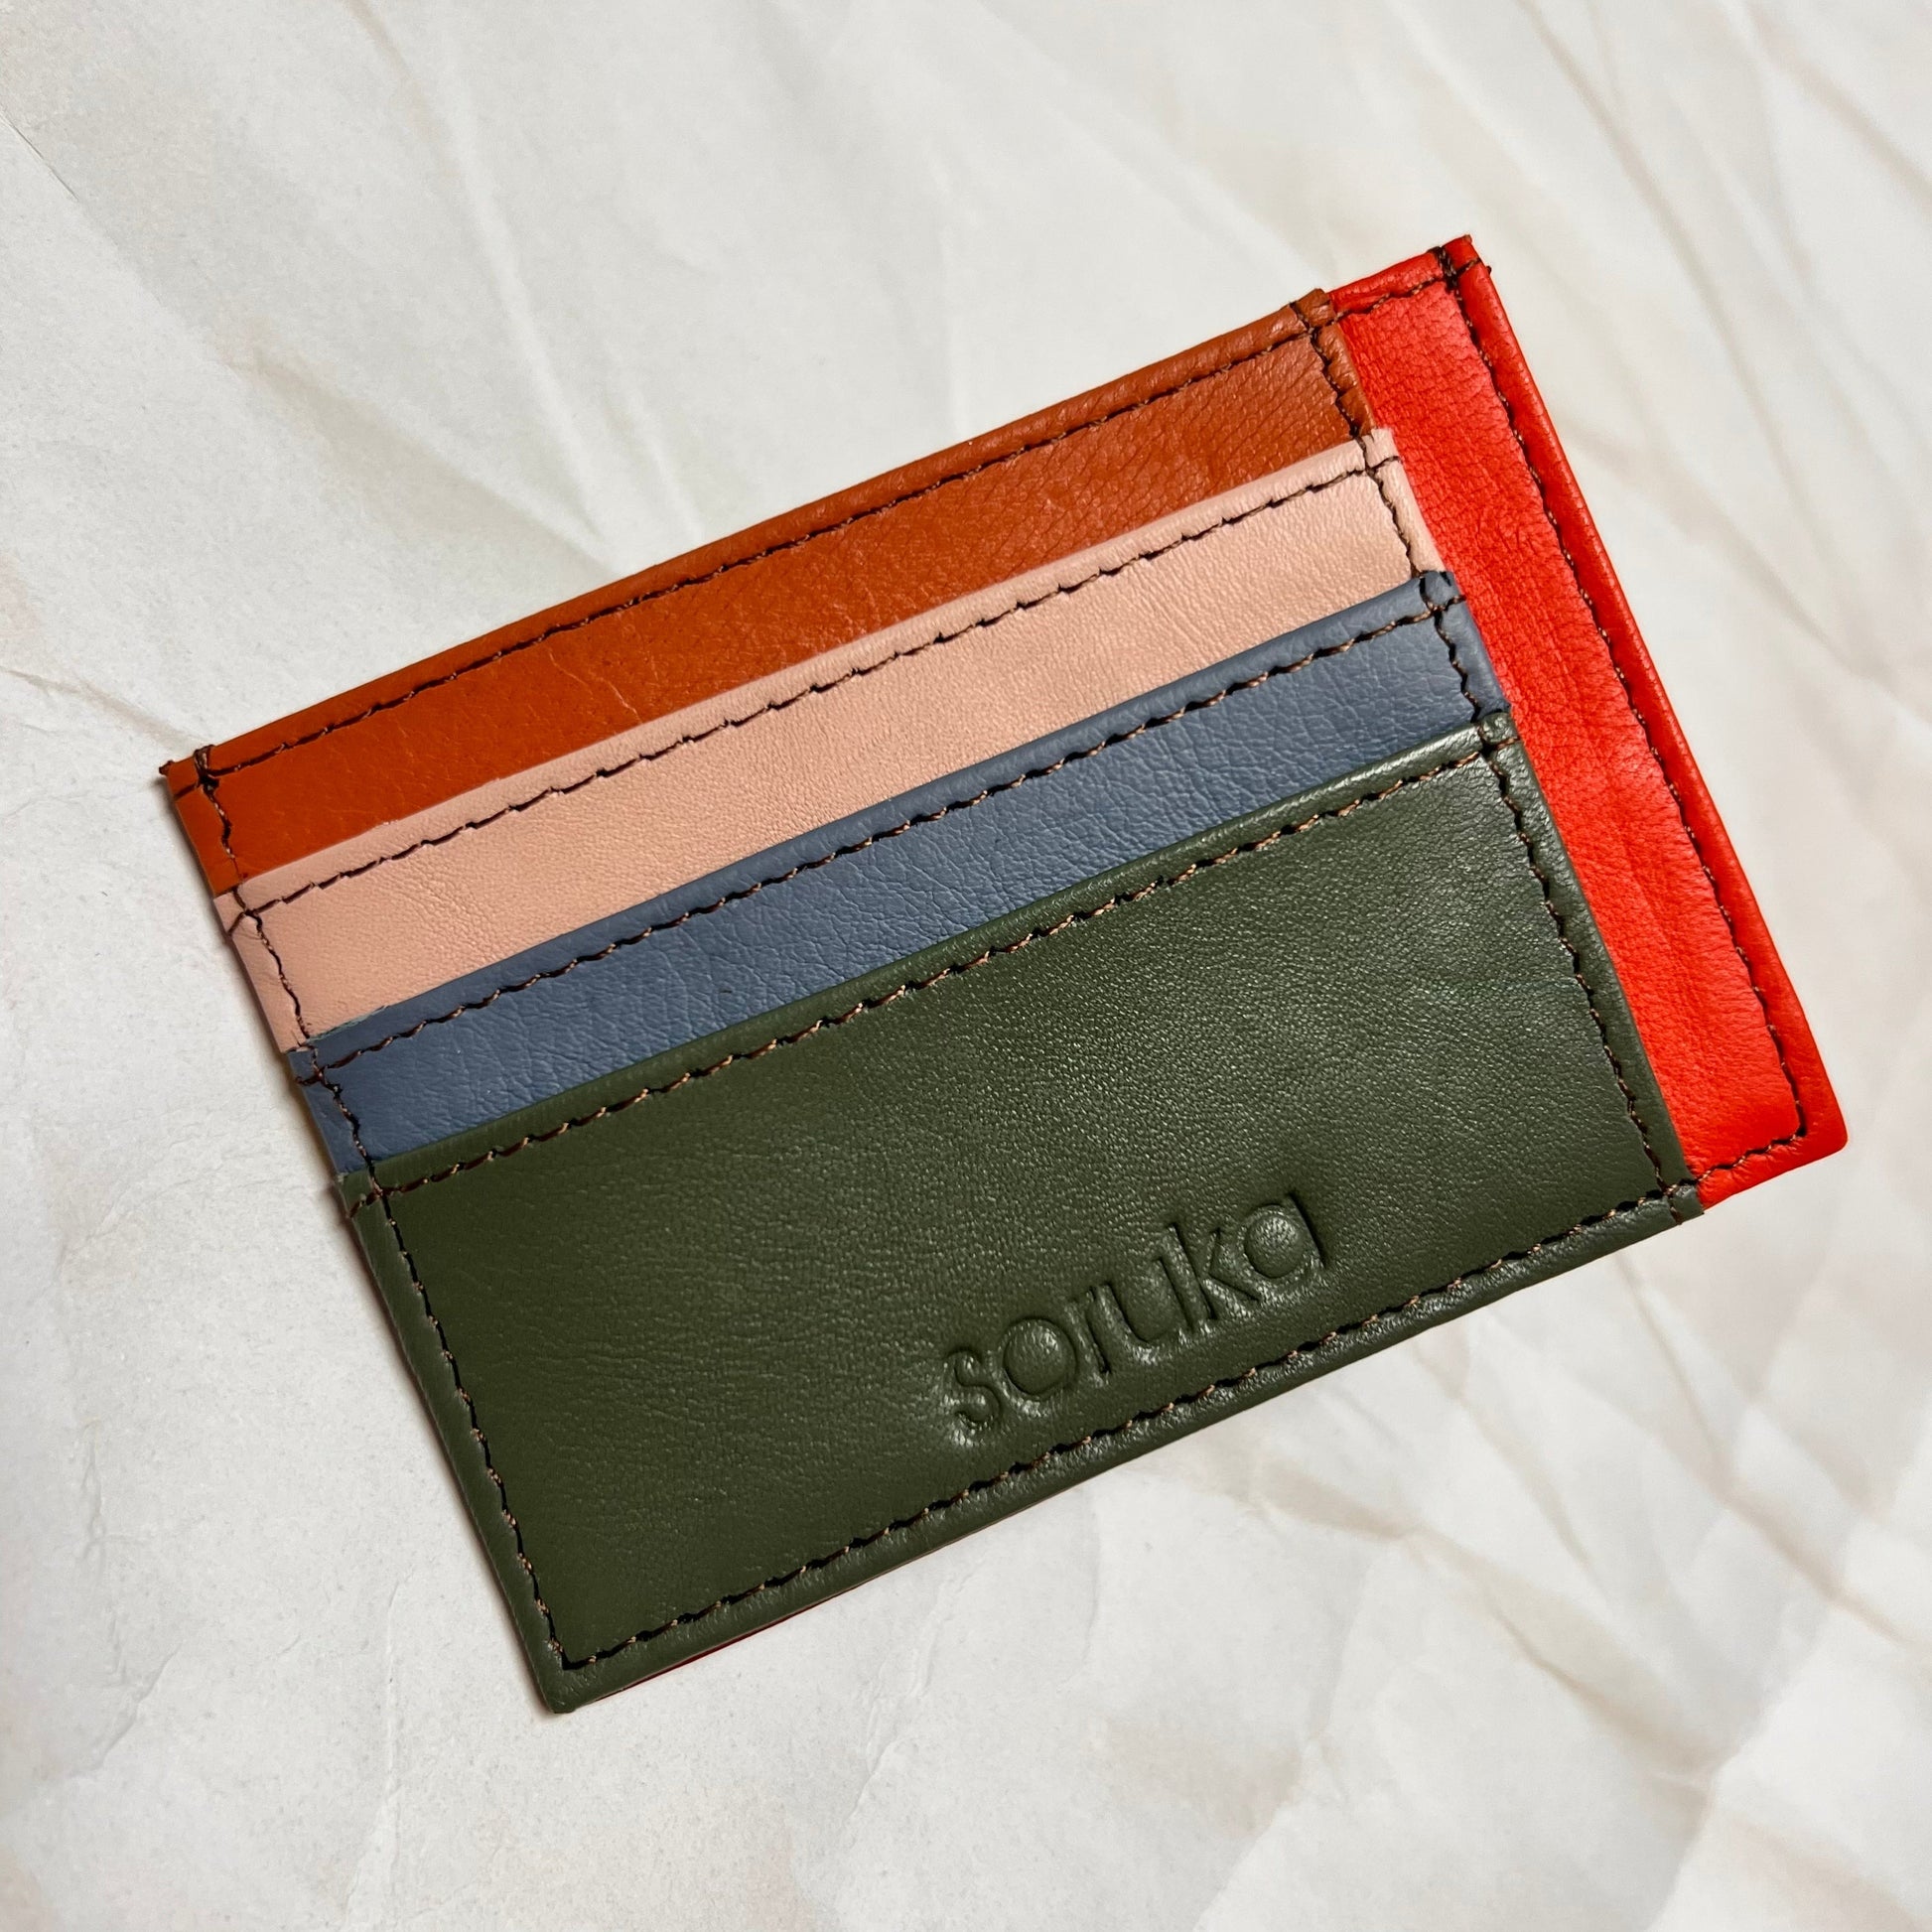 sage polly wallet with colorful card slots.